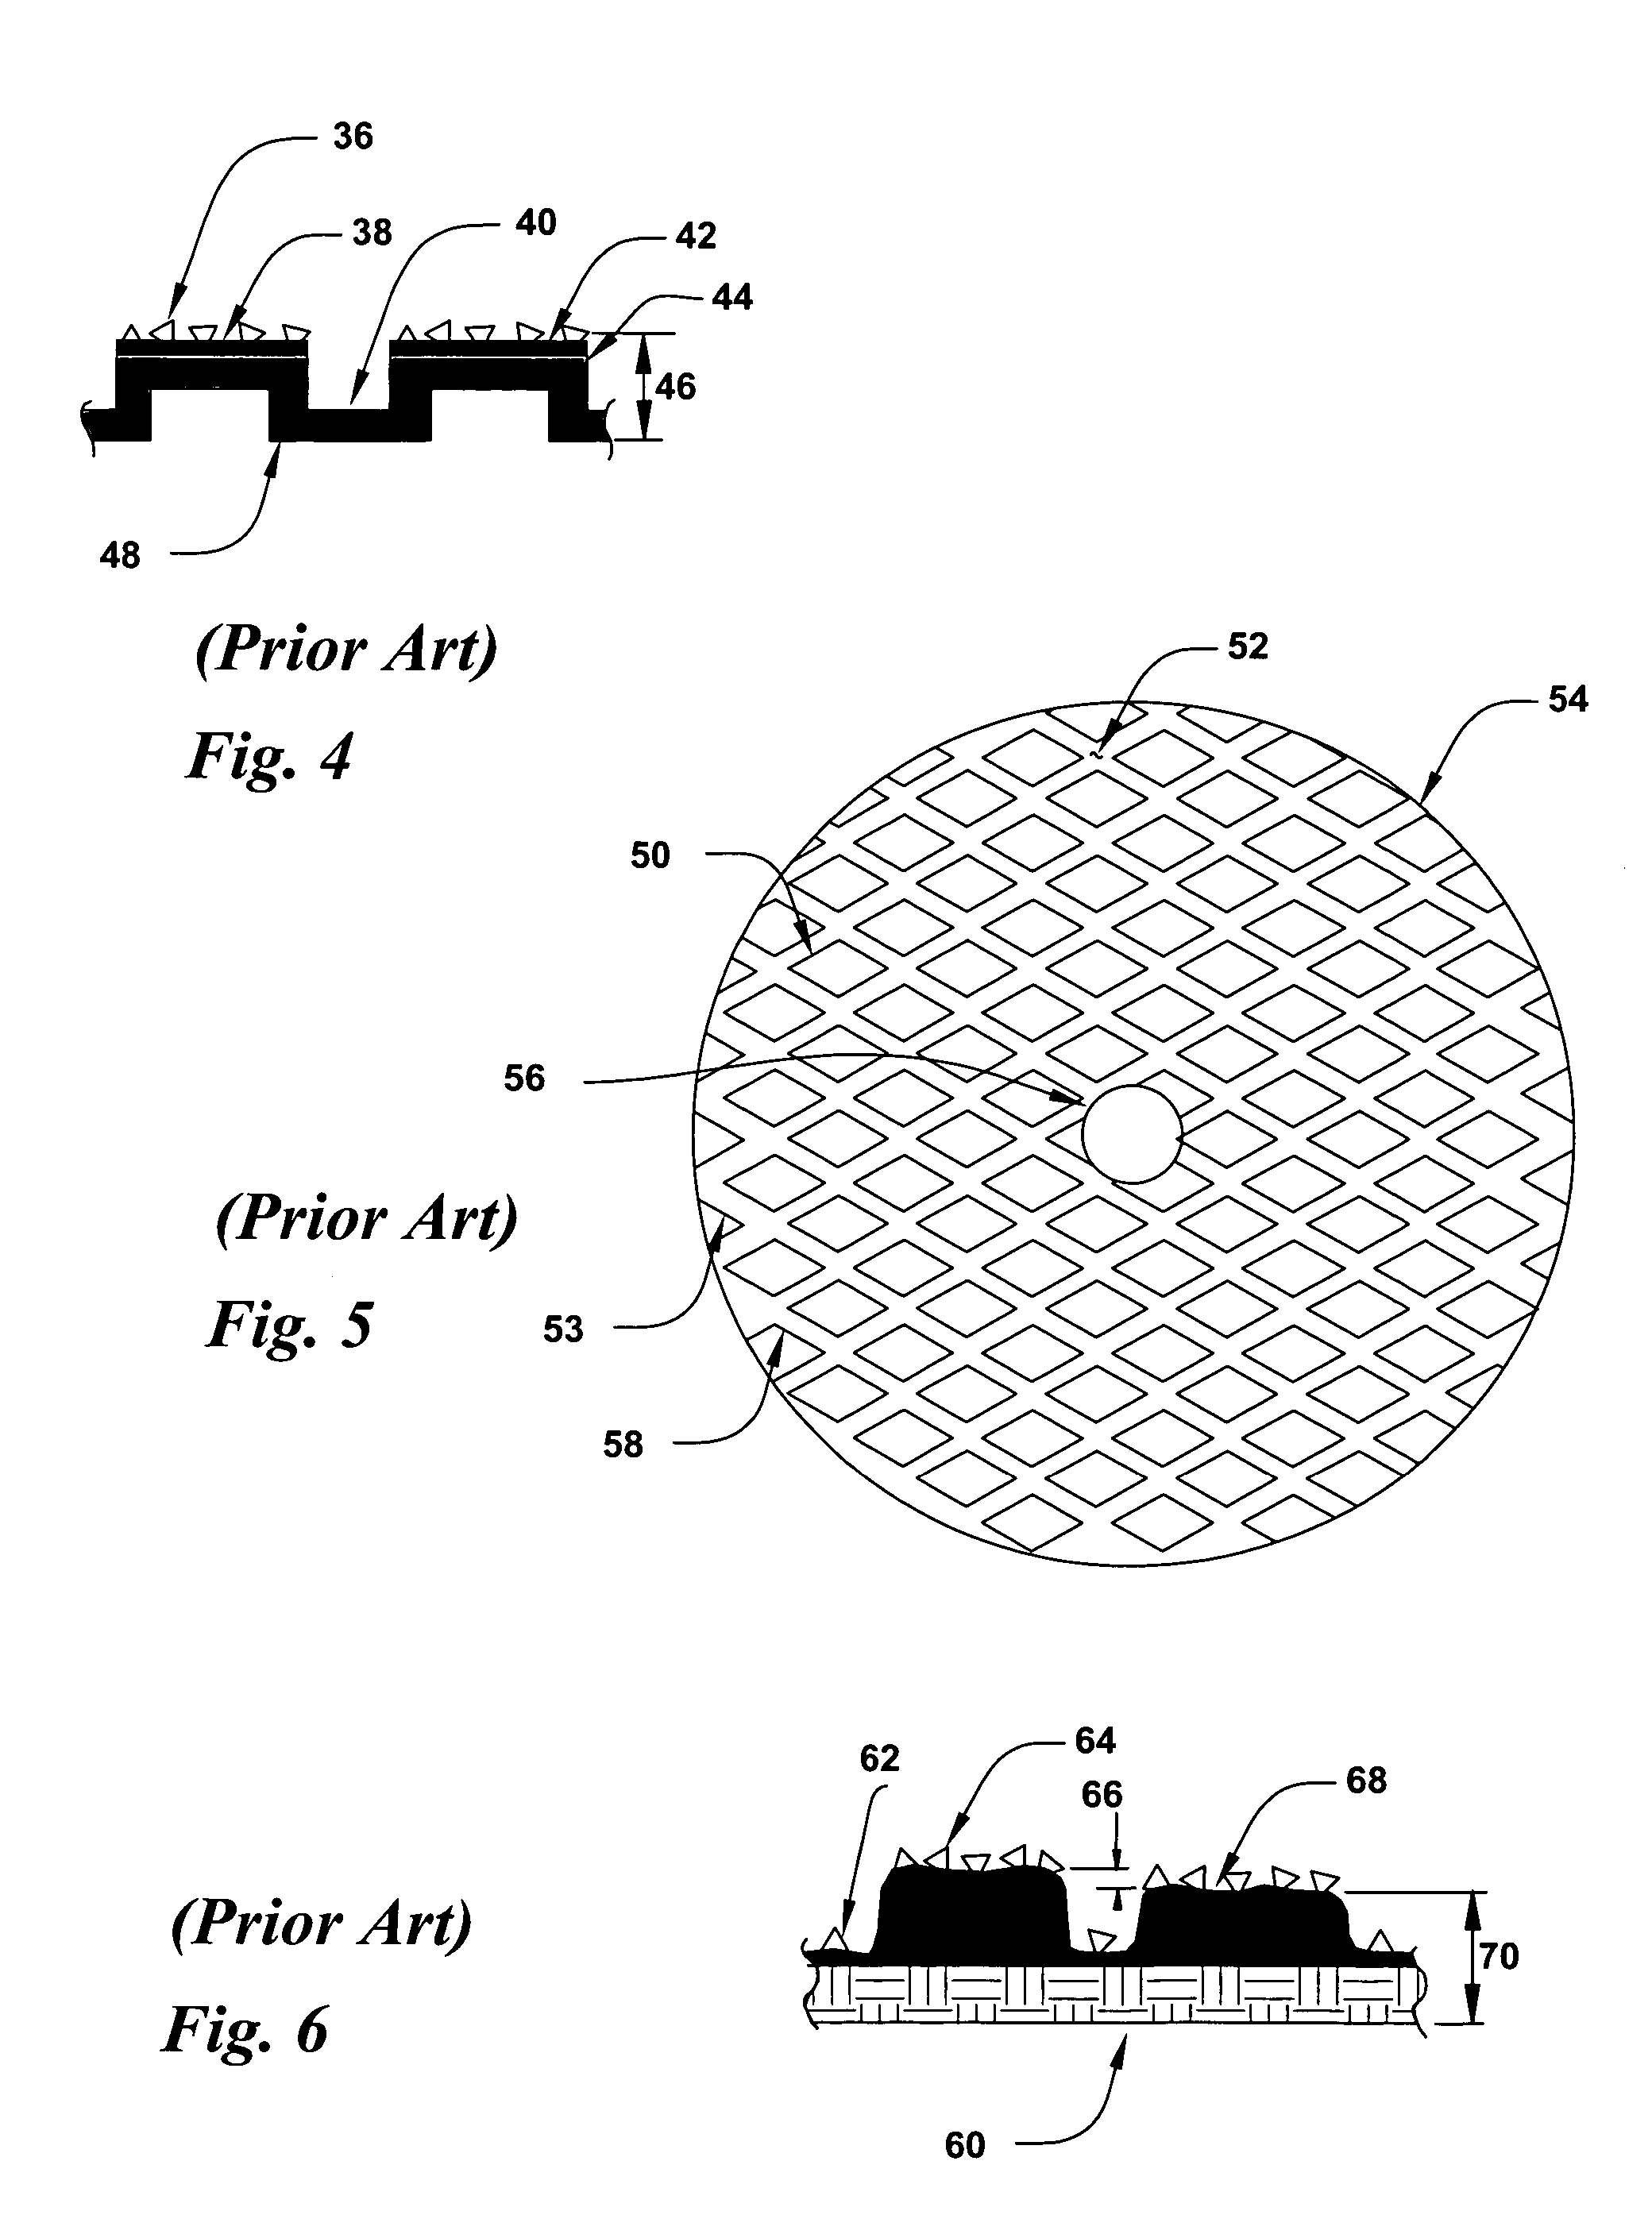 Method of forming a flexible abrasive sheet article